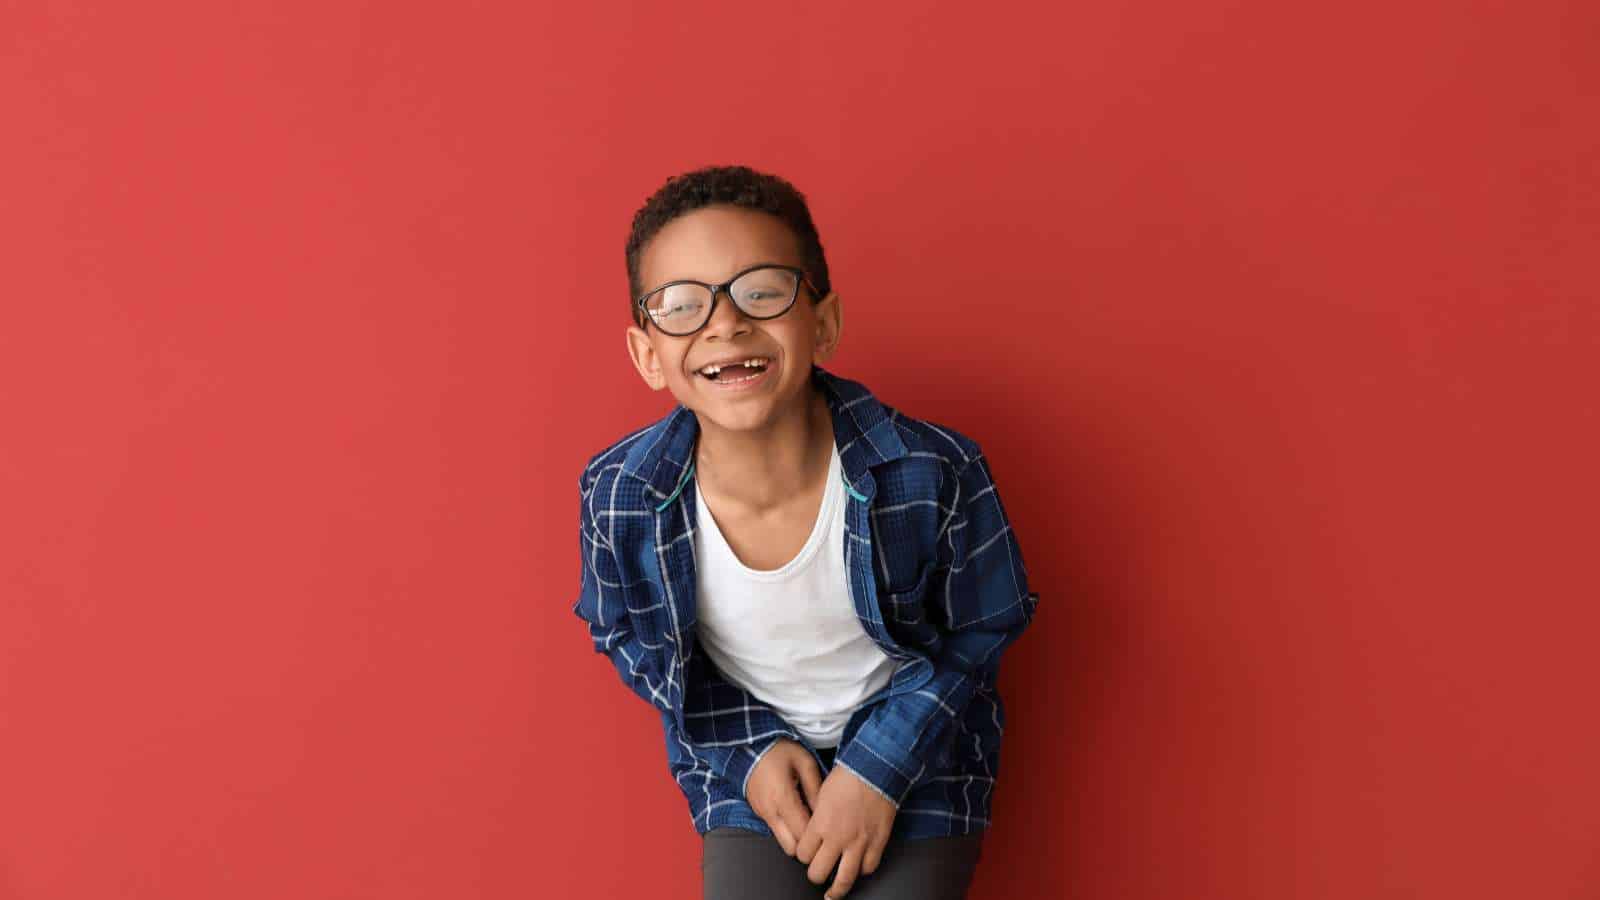 kid laughing with red background